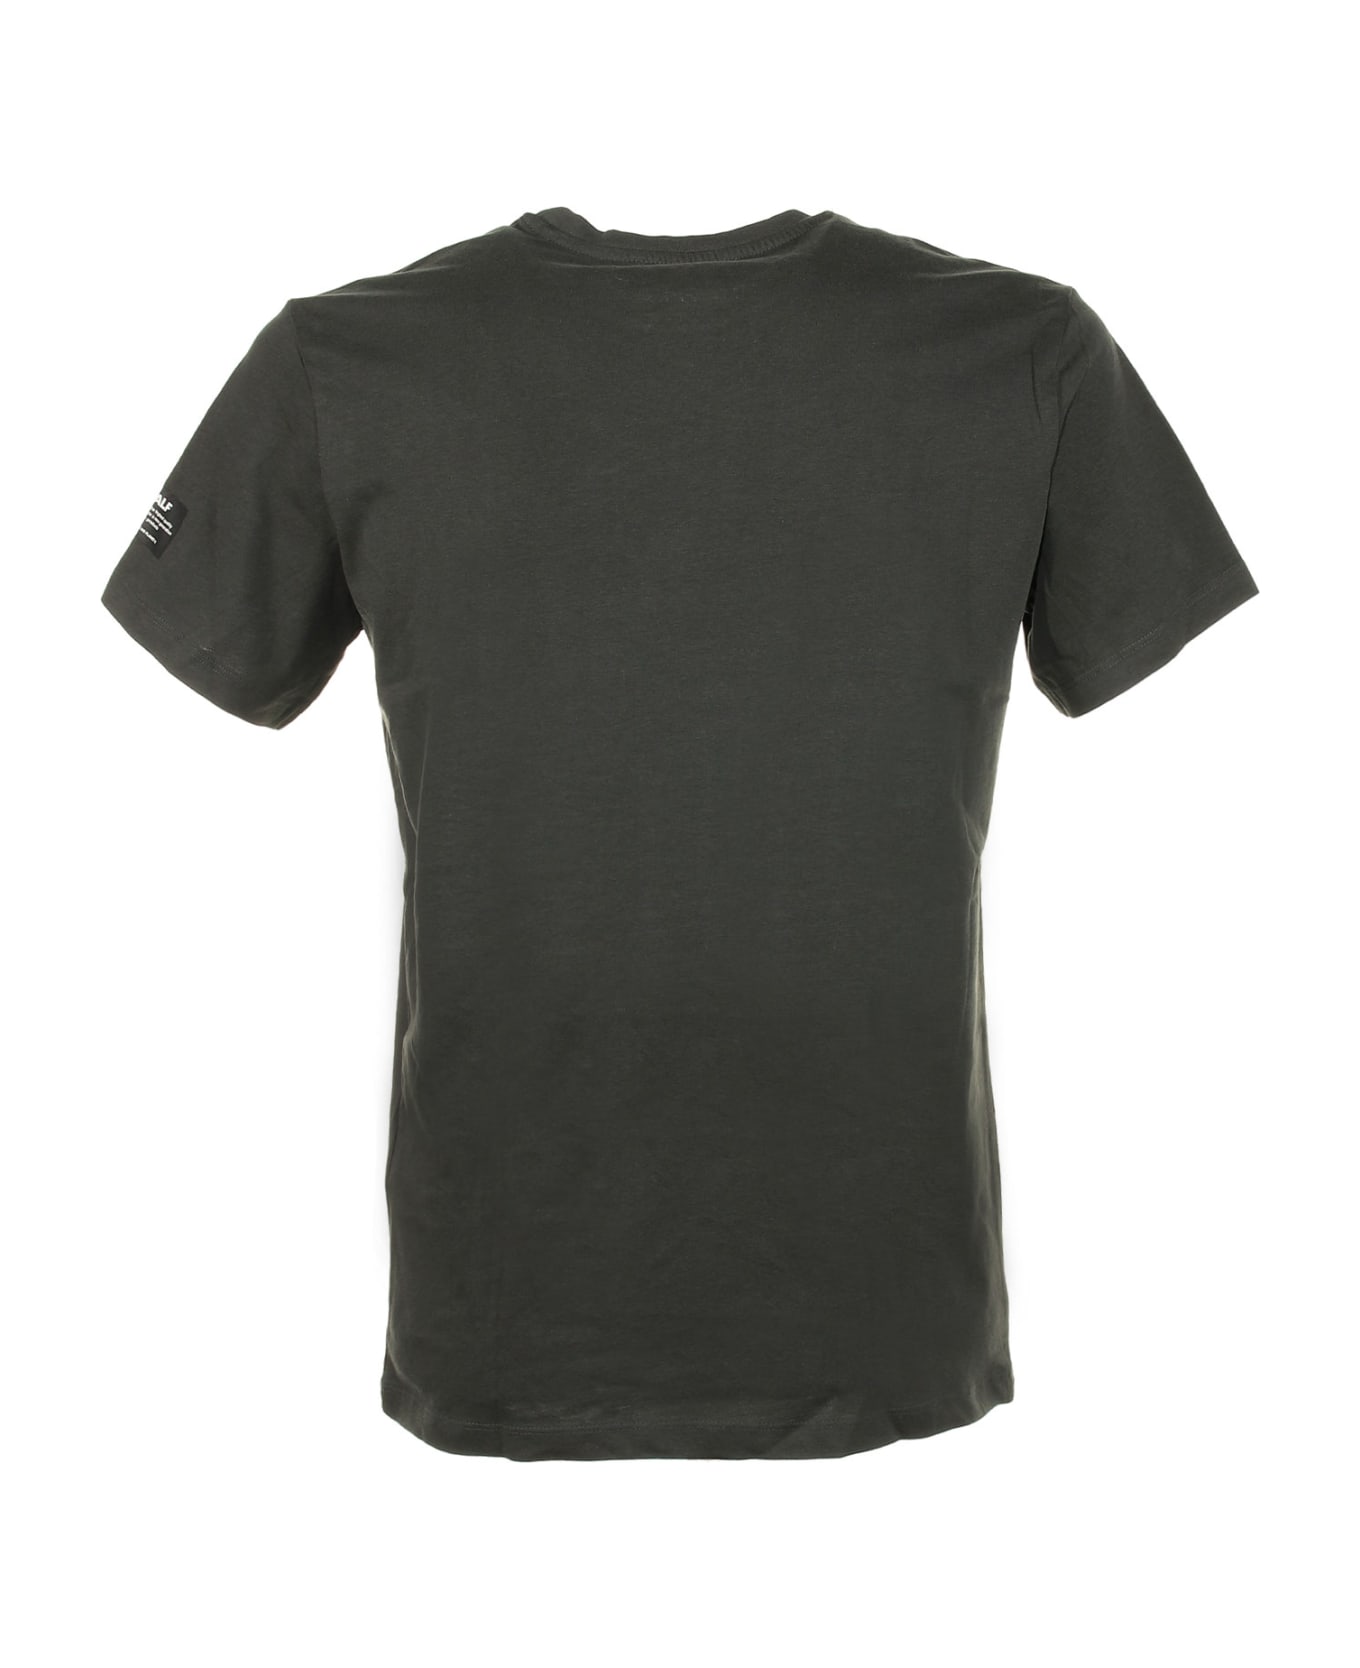 Ecoalf T-shirt With Contrasting Details - VINTAGE GREEN